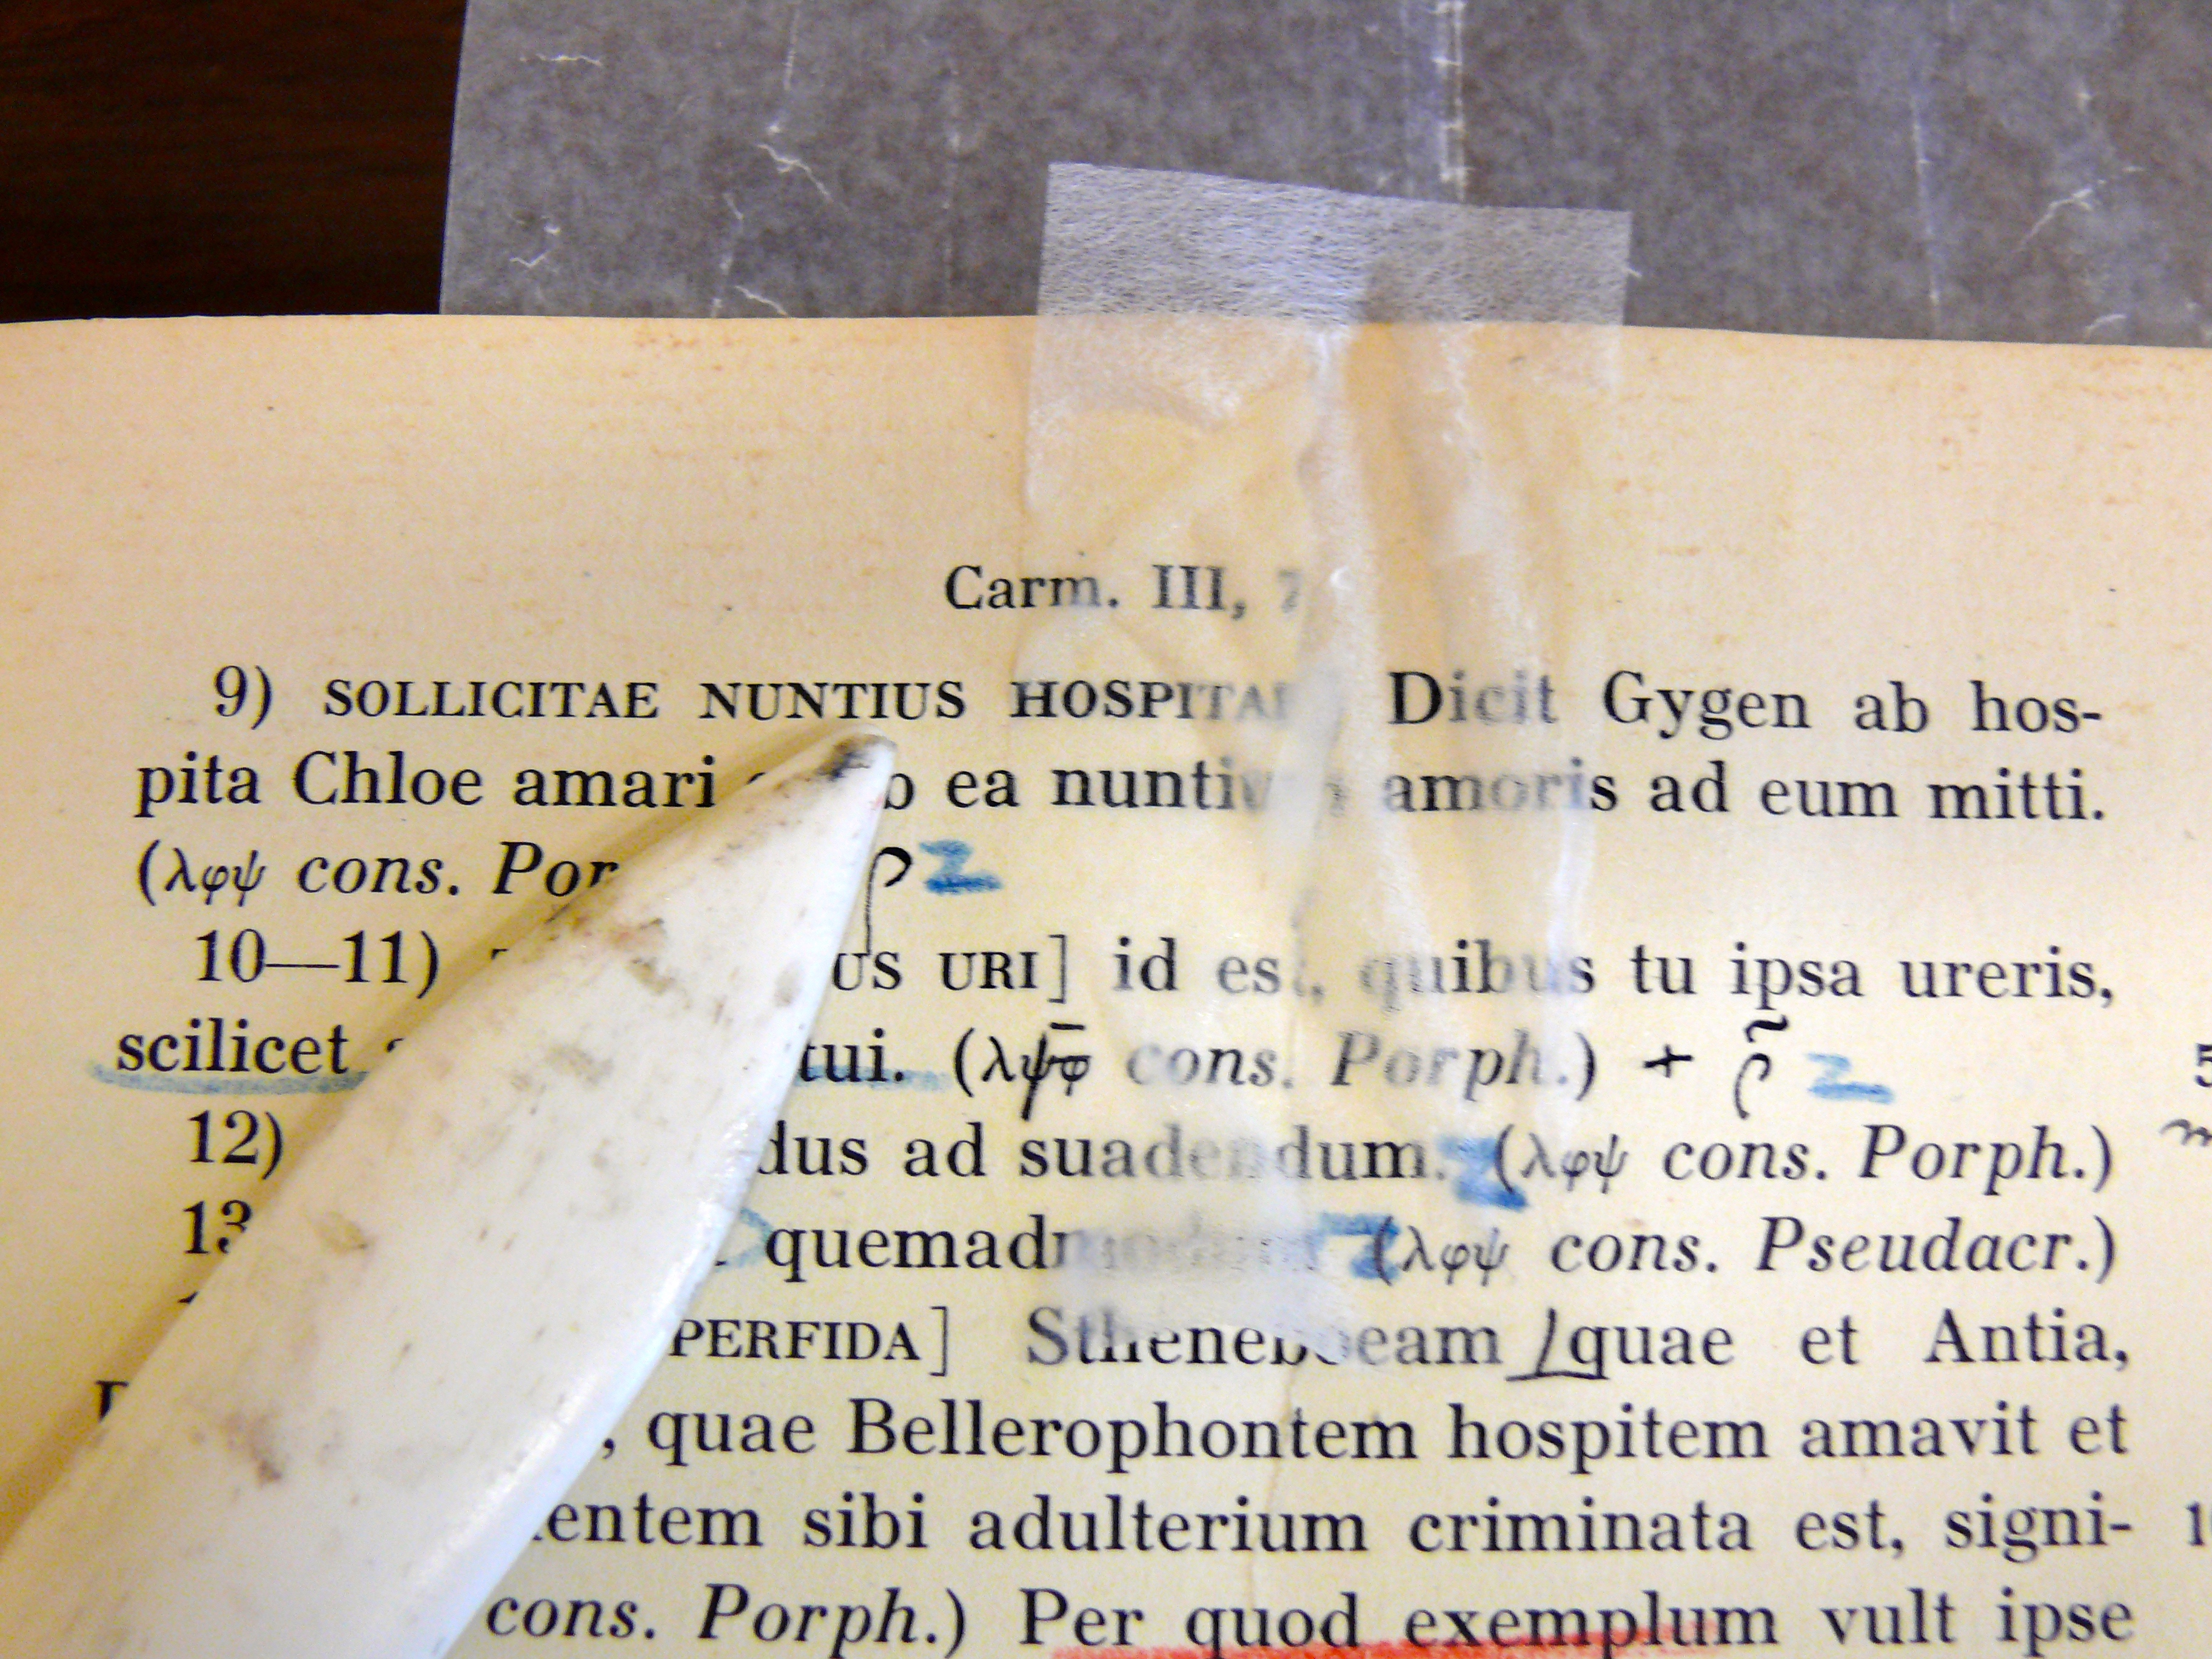 How to repair torn pages in a book, Without sticky tape